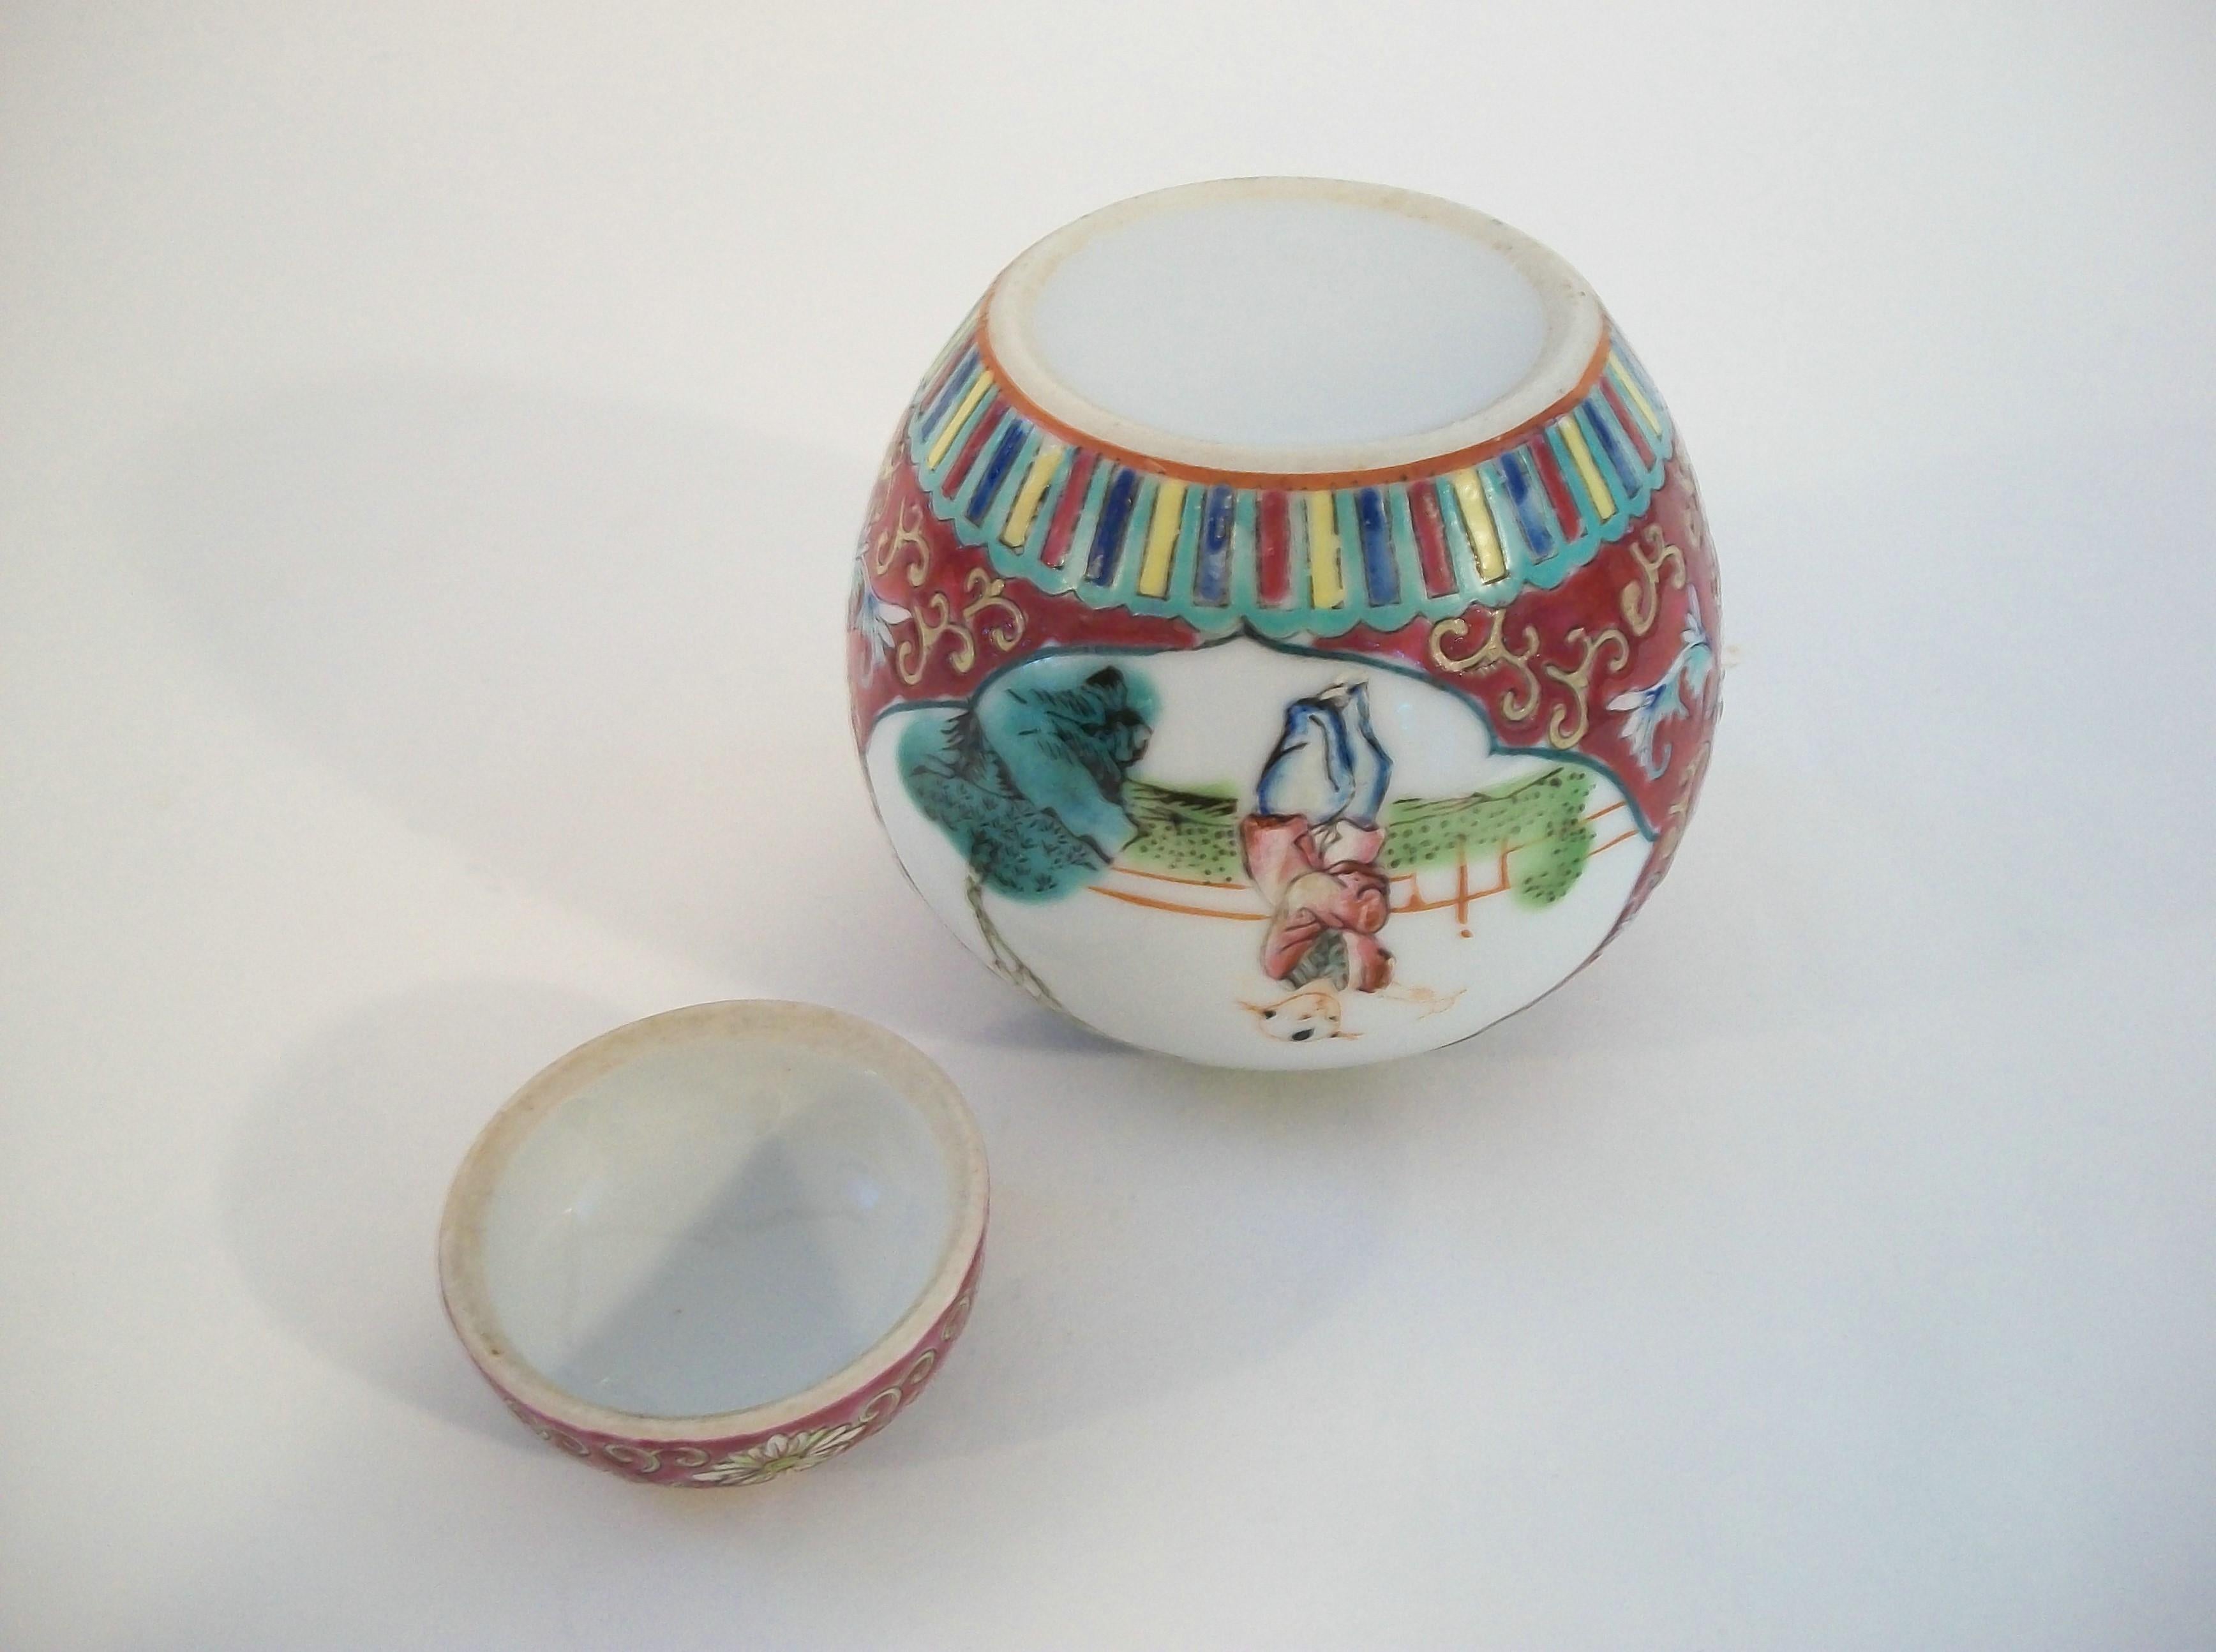 20th Century Vintage Hand Painted Famille Rose Porcelain Ginger Jar - China - Mid 20th C. For Sale